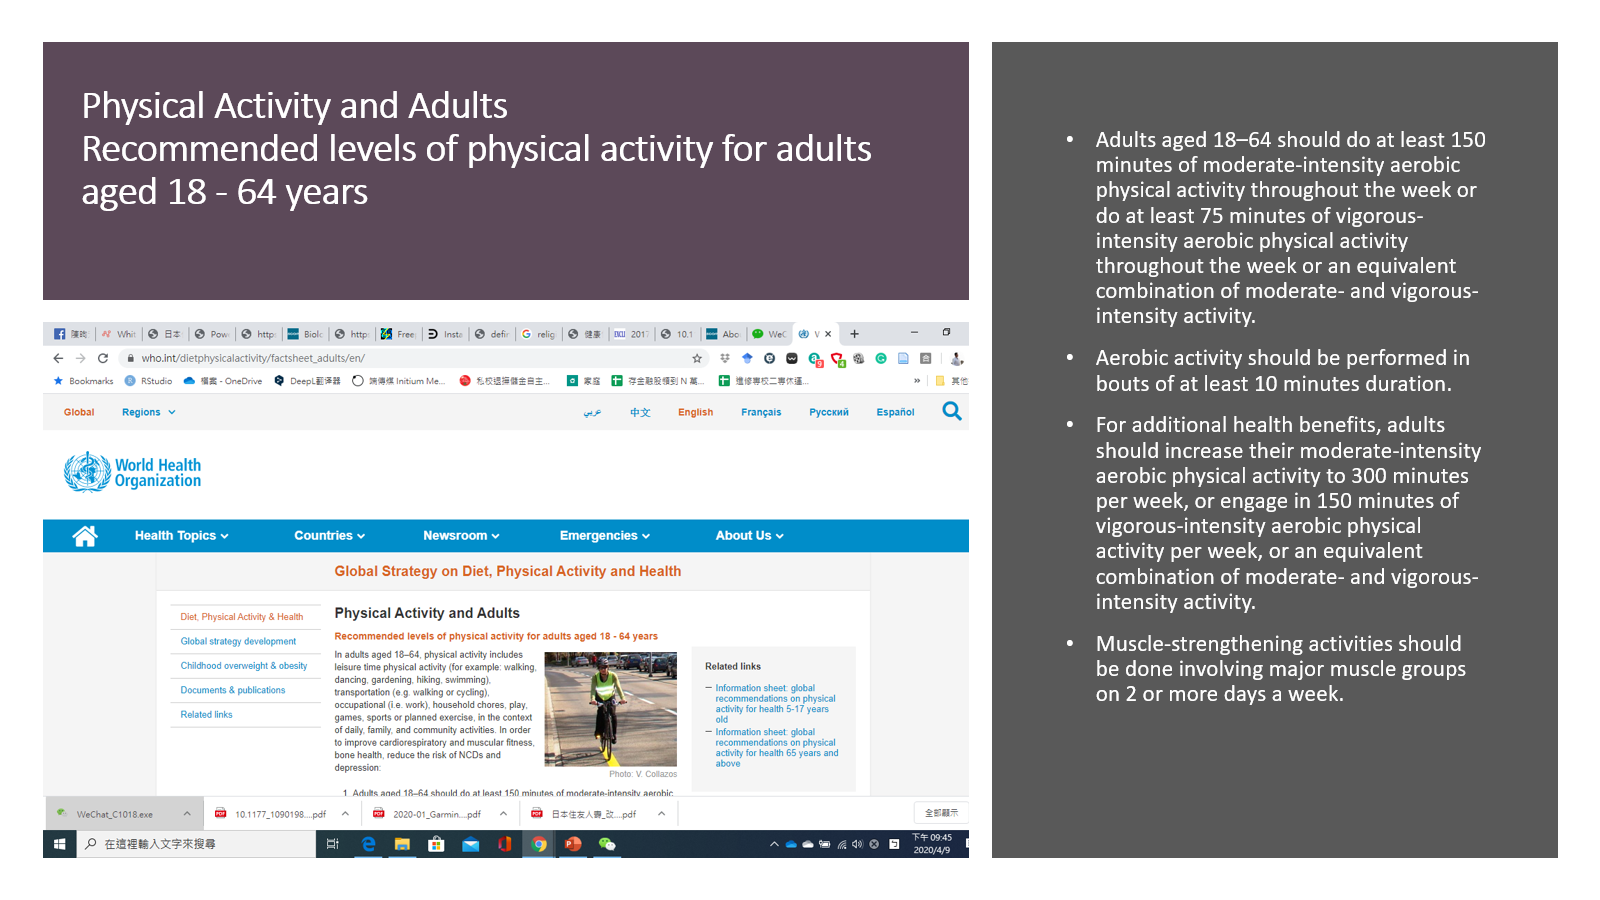 Physical Activity and Adults Recommended levels of physical activity for adults aged 18 - 64 years